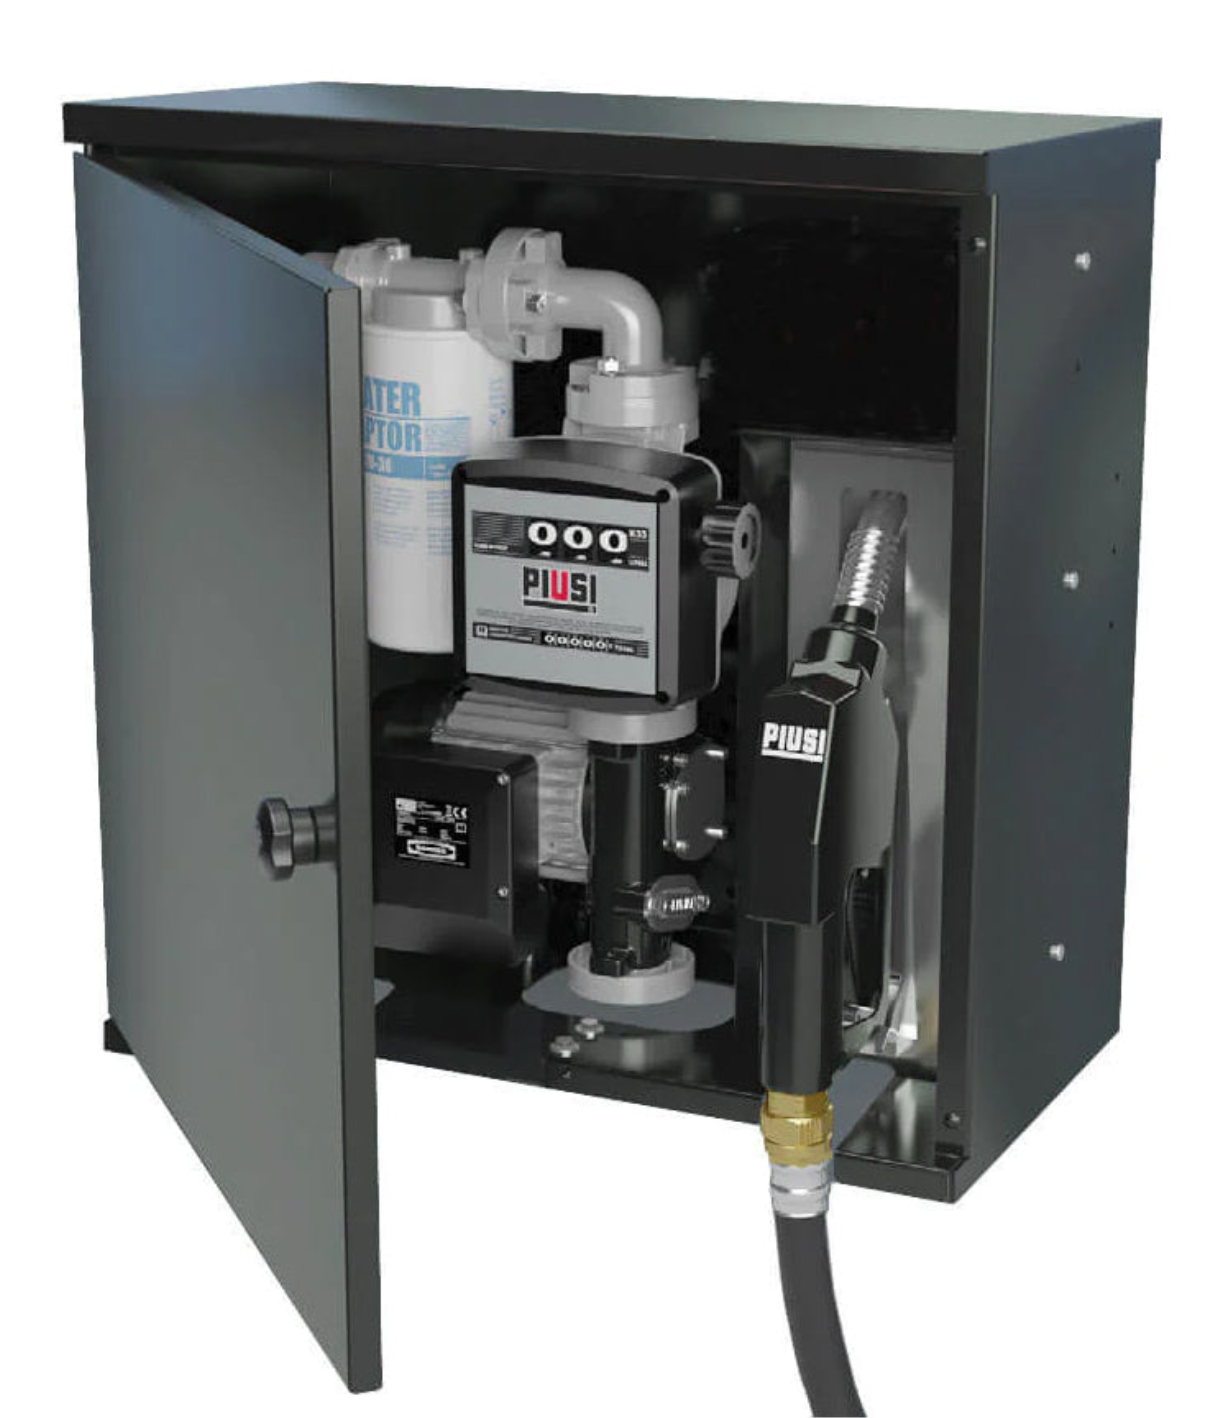 PIUSI 240V AC Pump with ST Box combo - Lockable Cabinet, option to high and low flow